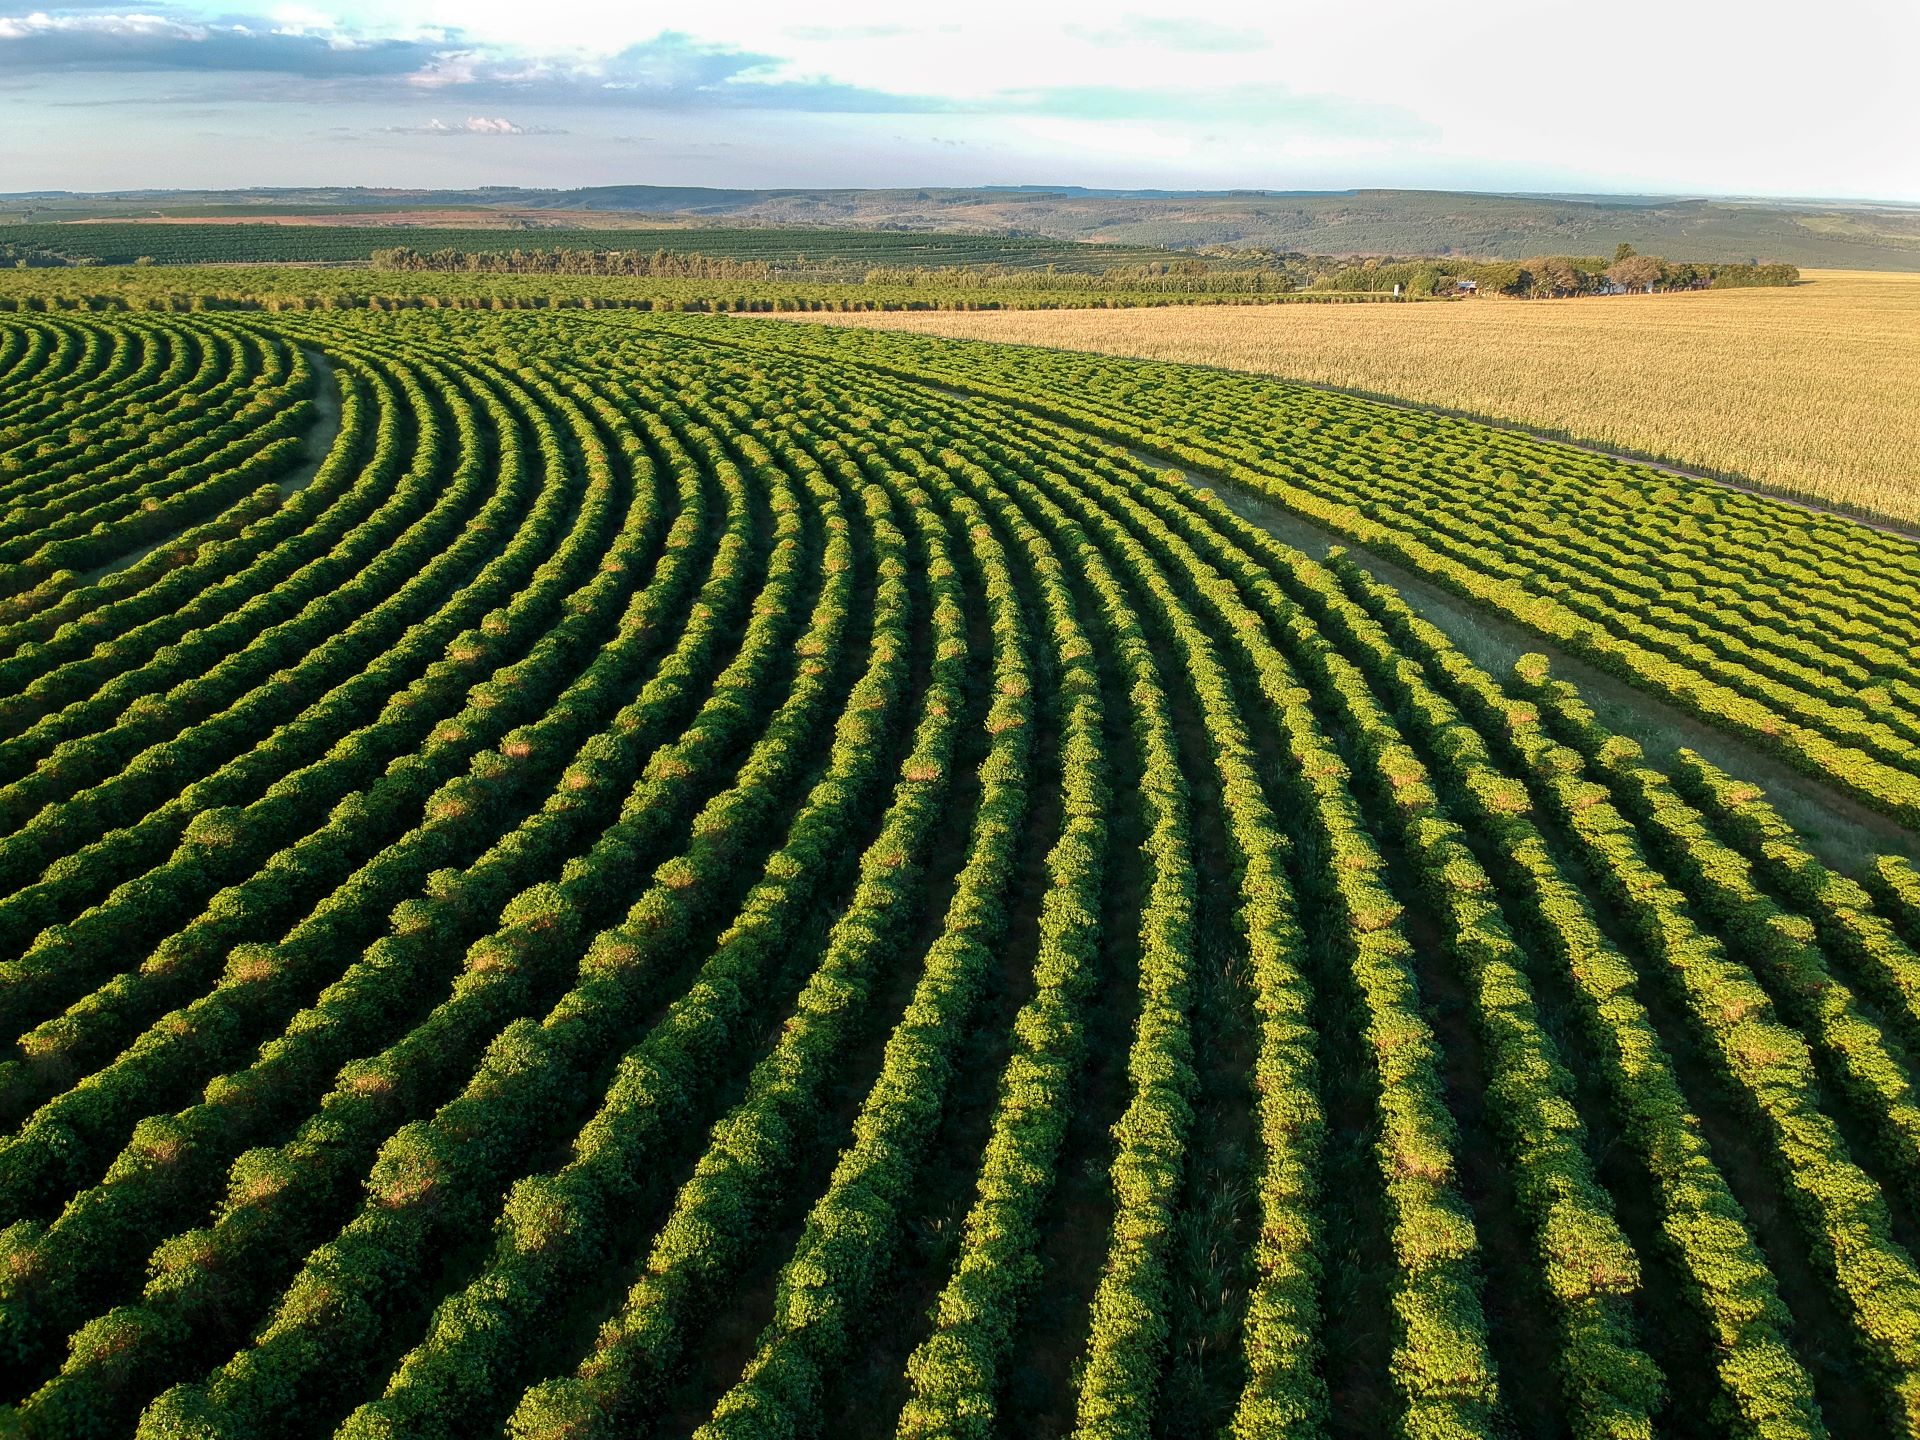 Decorative image showing an aerial view of coffee plants growing in a field in Brazil